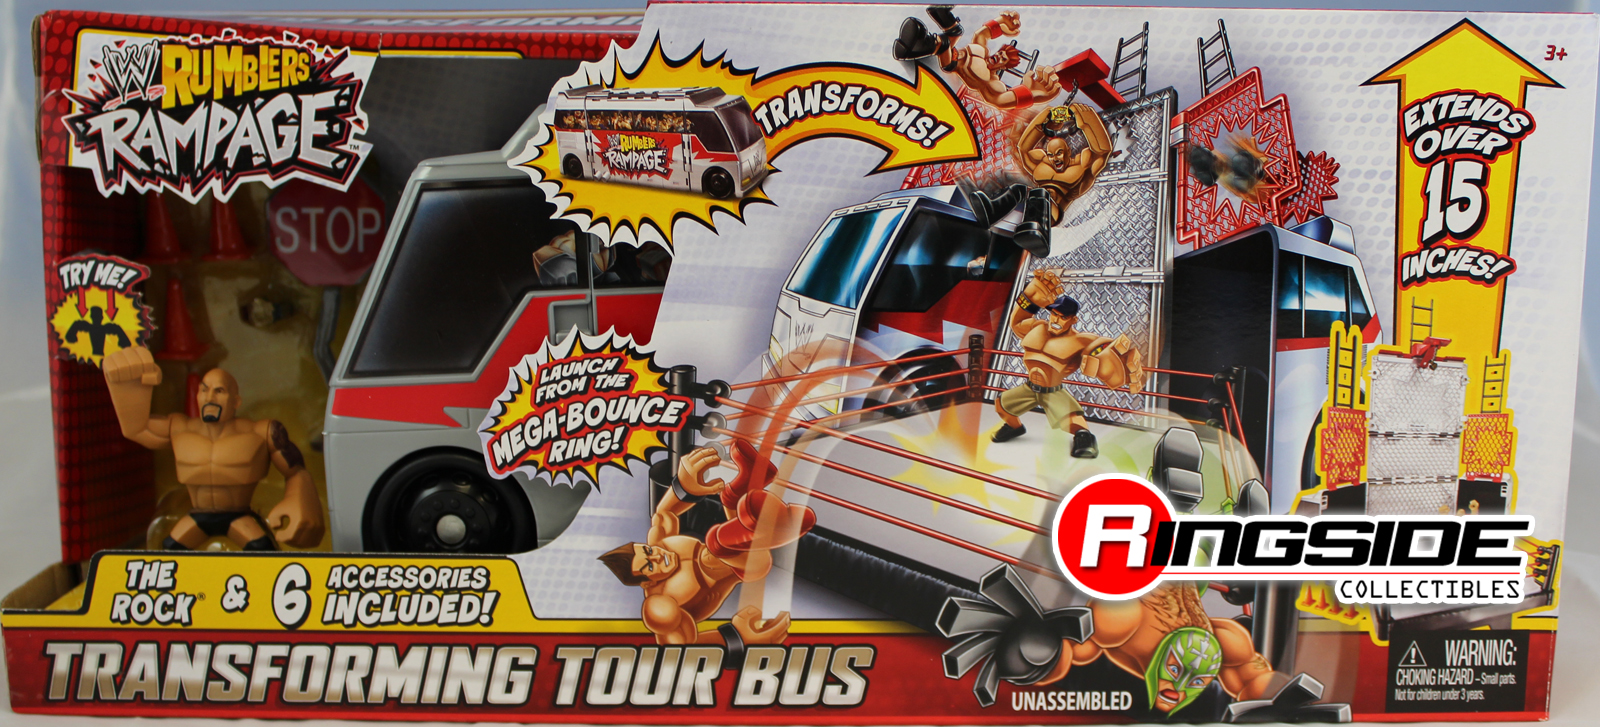 Transforming Tour Bus w/ The Rock - WWE Rumblers Rampage Toy Wrestling Action Figure Playset